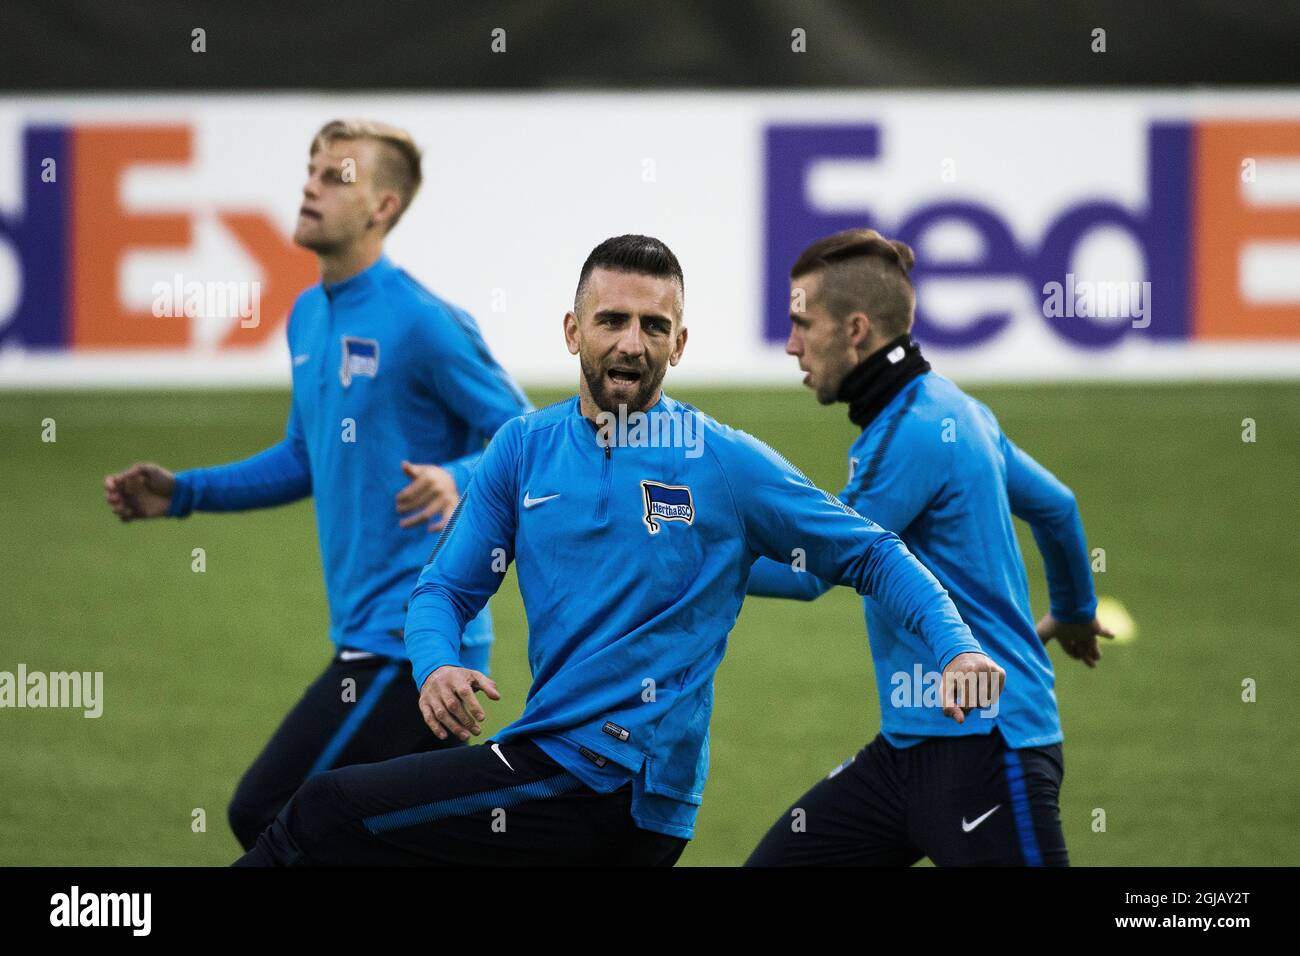 Hertha Berlin's Vedad Ibisevic takes part in a training session at Jamtkraft Arena in Ostersund, Sweden, on Sept. 27, 2017, on the eve of the team's UEFA Europa League soccer match against Ostersunds FK. Photo: Robert Henriksson / TT / code 11393  Stock Photo